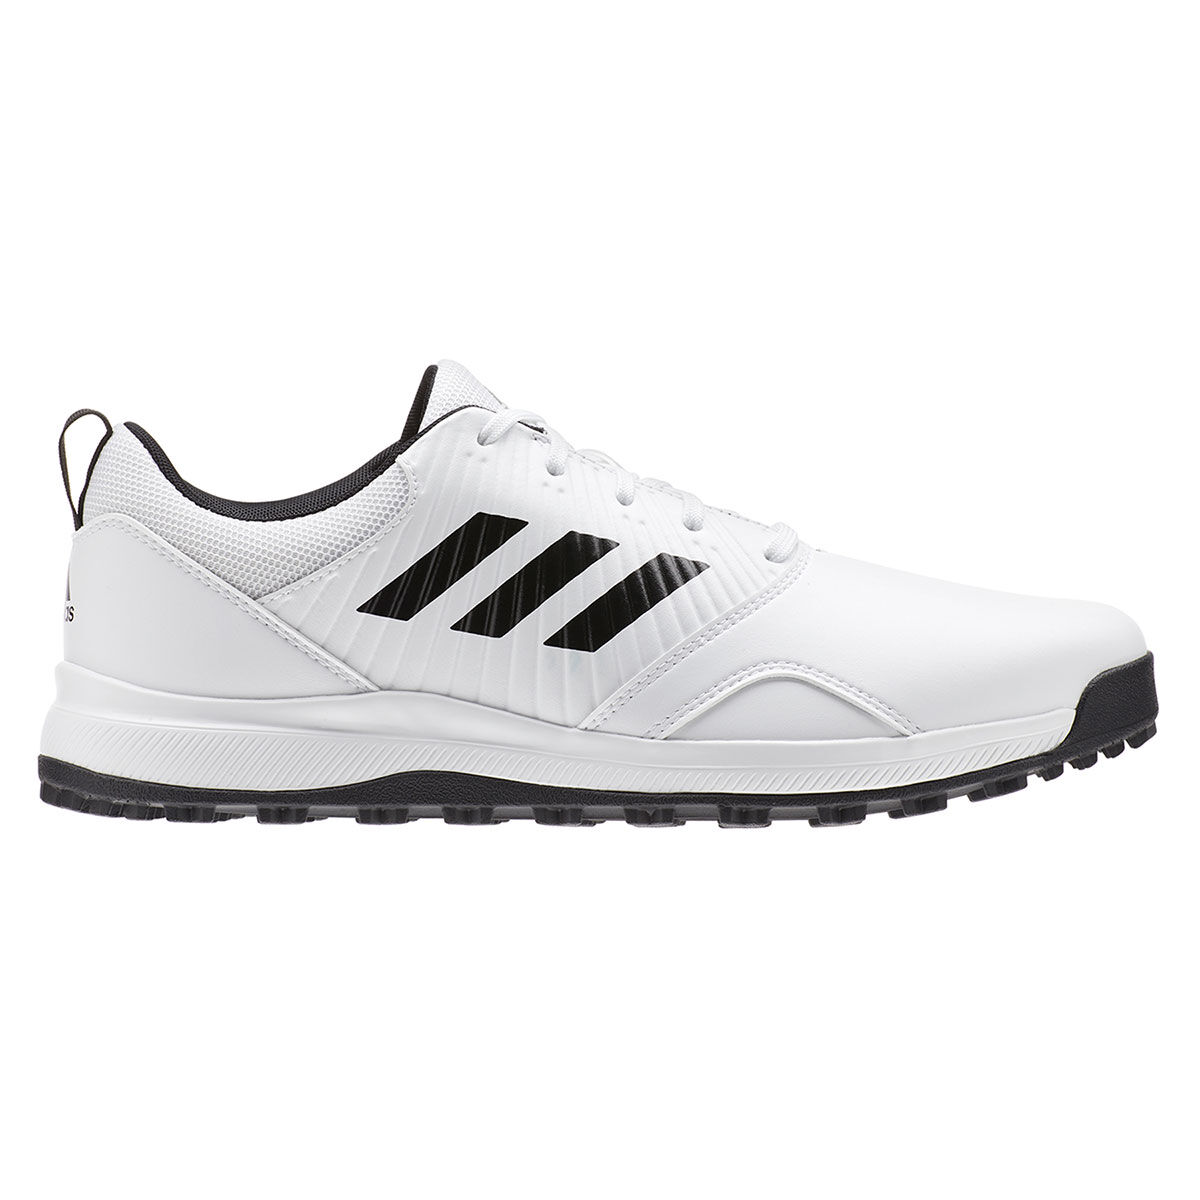 adidas Men's CP Traxion Spikeless Golf Shoes, Mens, White/core black/grey six, 9.5, Wide | American Golf von adidas Golf